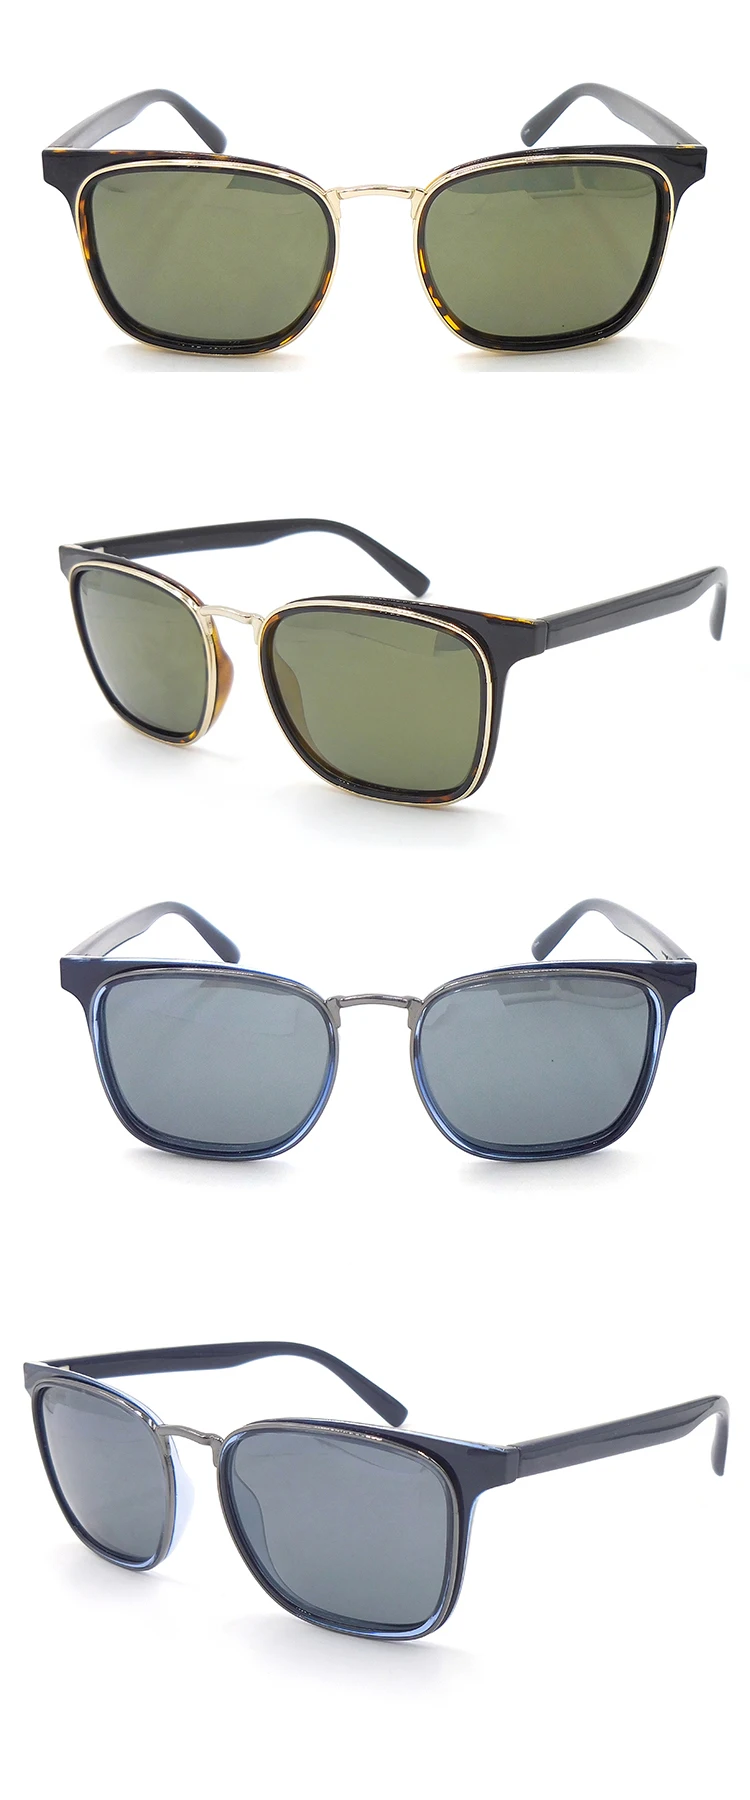 Eugenia sunglasses manufacturers new arrival at sale-7